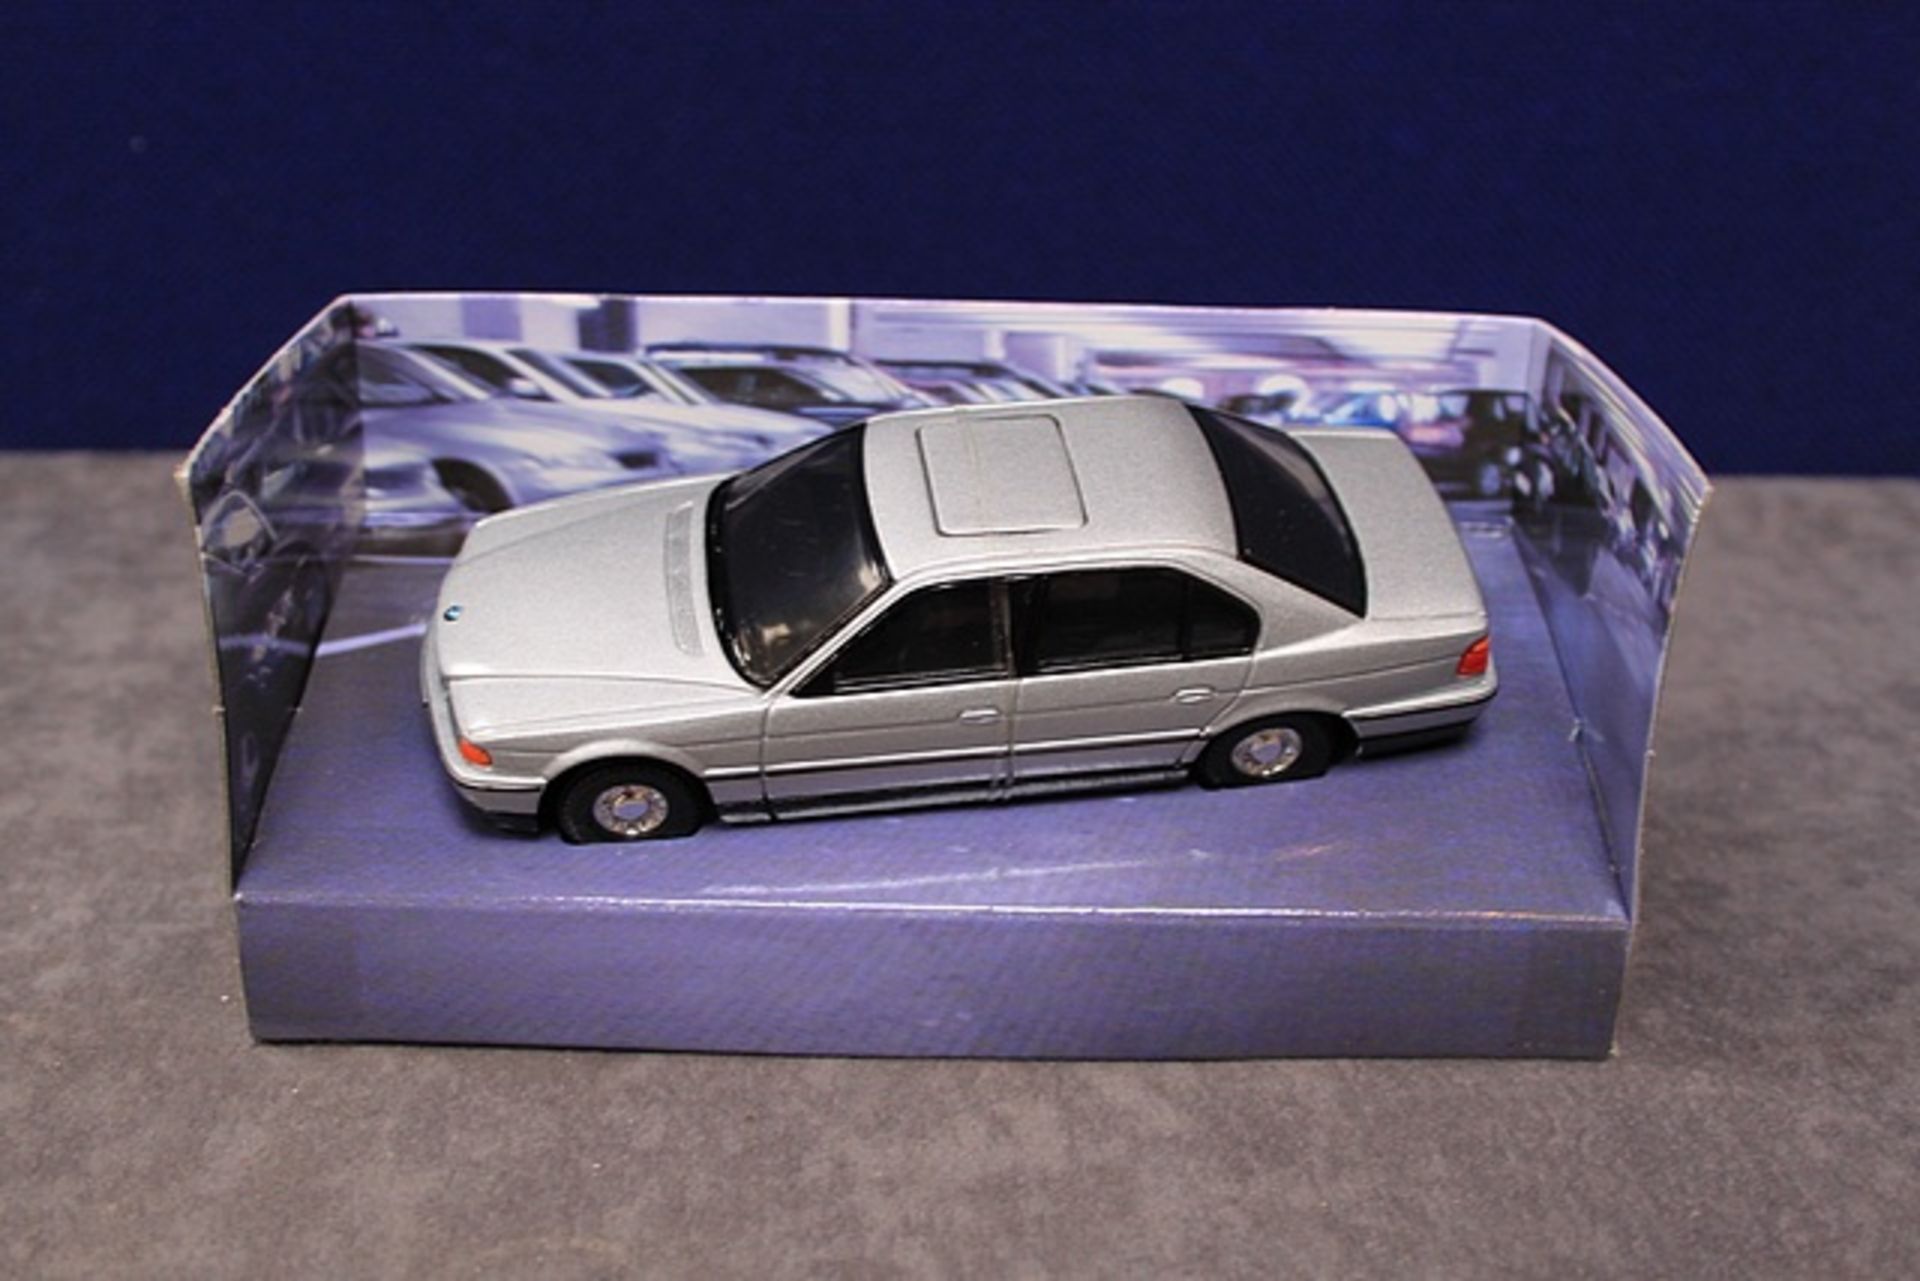 Corgi Diecast 007 The Definitive Bond Collection # 05101 BMW 7650i From Tomorrow Never Dies In Box